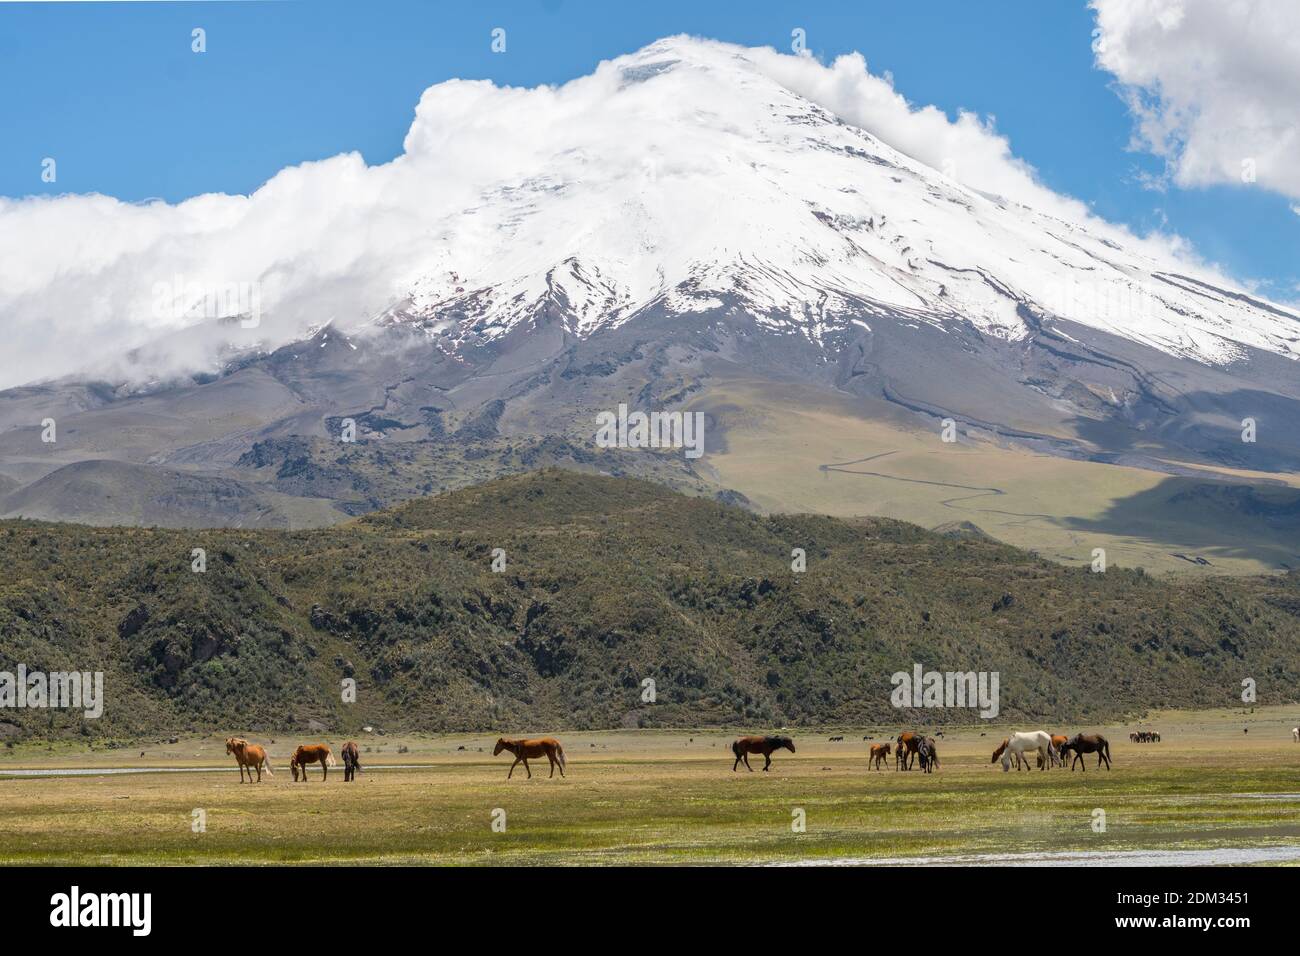 The snowcapped Cotopaxi Volcano with wild horses in the foreground. Cotopaxi National Park in the Ecuadorian Andes. Stock Photo